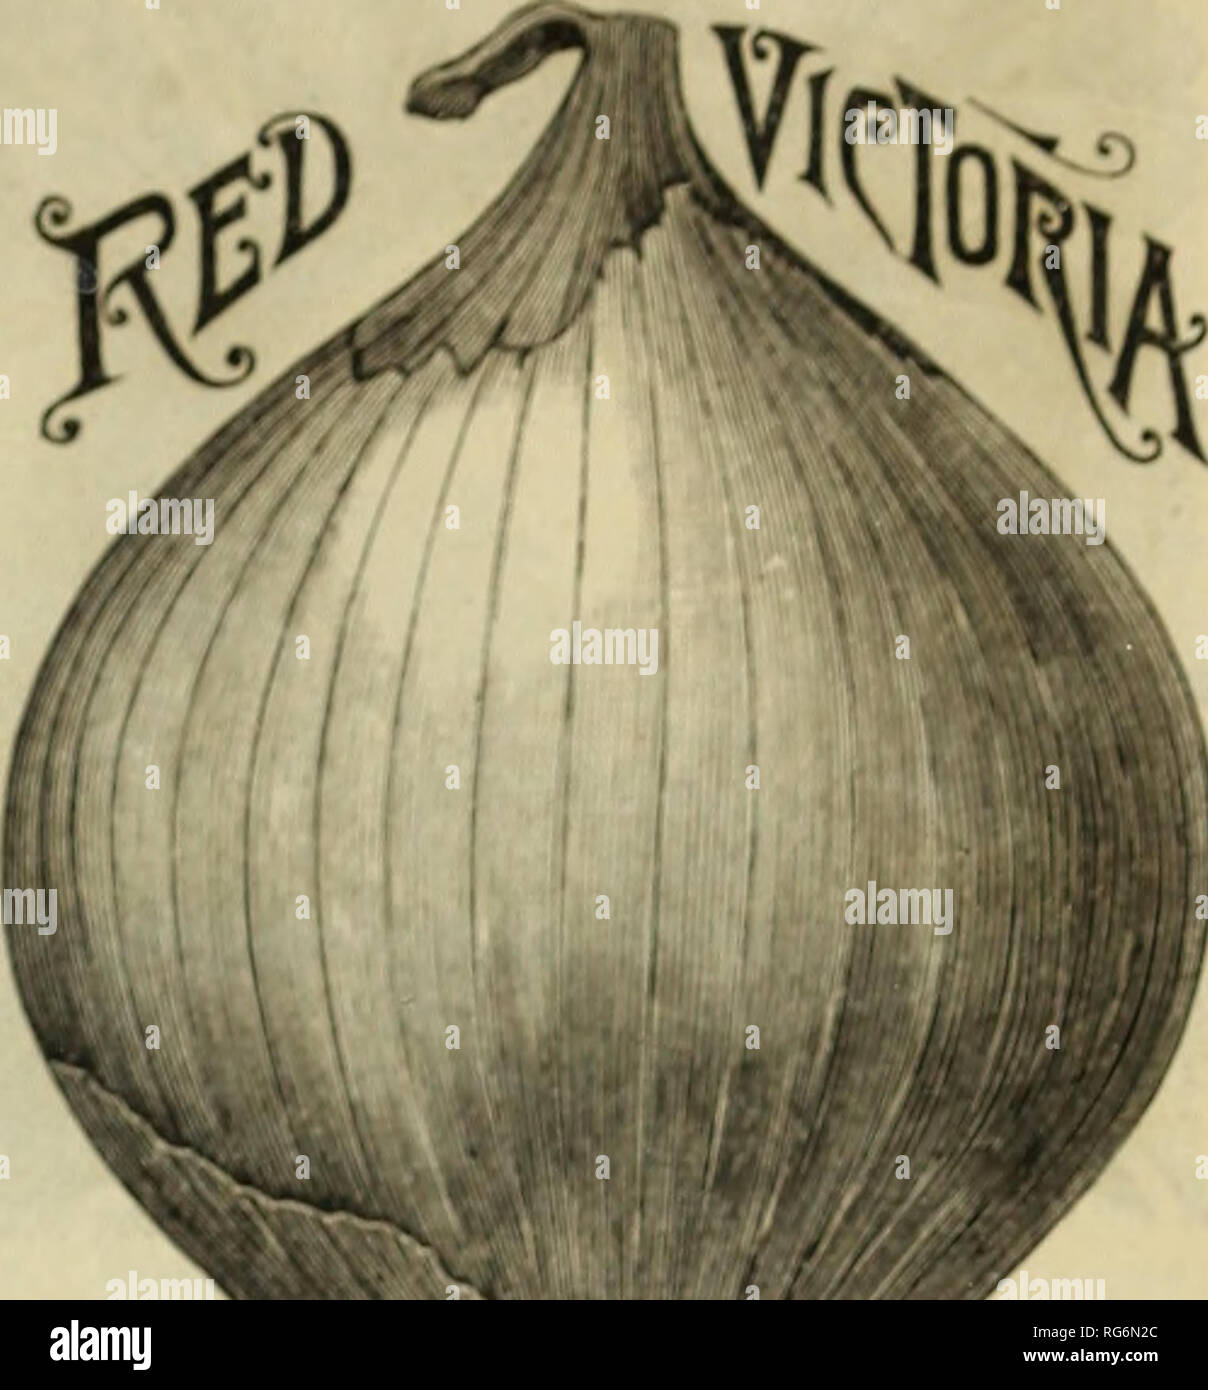 . Burpee's novelties for 1890. Nursery stock Pennsylvania Philadelphia Catalogs; Flowers Pennsylvania Catalogs; Vegetables Pennsylvania Catalogs; Seeds Pennsylvania Catalogs. w T/ictopia Gpions. AN ENTIRELY NEW RACE OF MAMMOTH ONIONS FROM SARDINIA. This distinct new race of Onioiw from Sartlinio, of which wc |)urchaHcul wc are a-vsuretl by the growers (and we have nyain secured the entire crops) that this year the seec a small jx-r- centageof Red Onions, and also a projxirtion of tlatlcr- shajicd onions. Whil.- u.- have received rejwrts of WHITE VICTORIA ONIONS wei^hinj^4jounds each and over,  Stock Photo